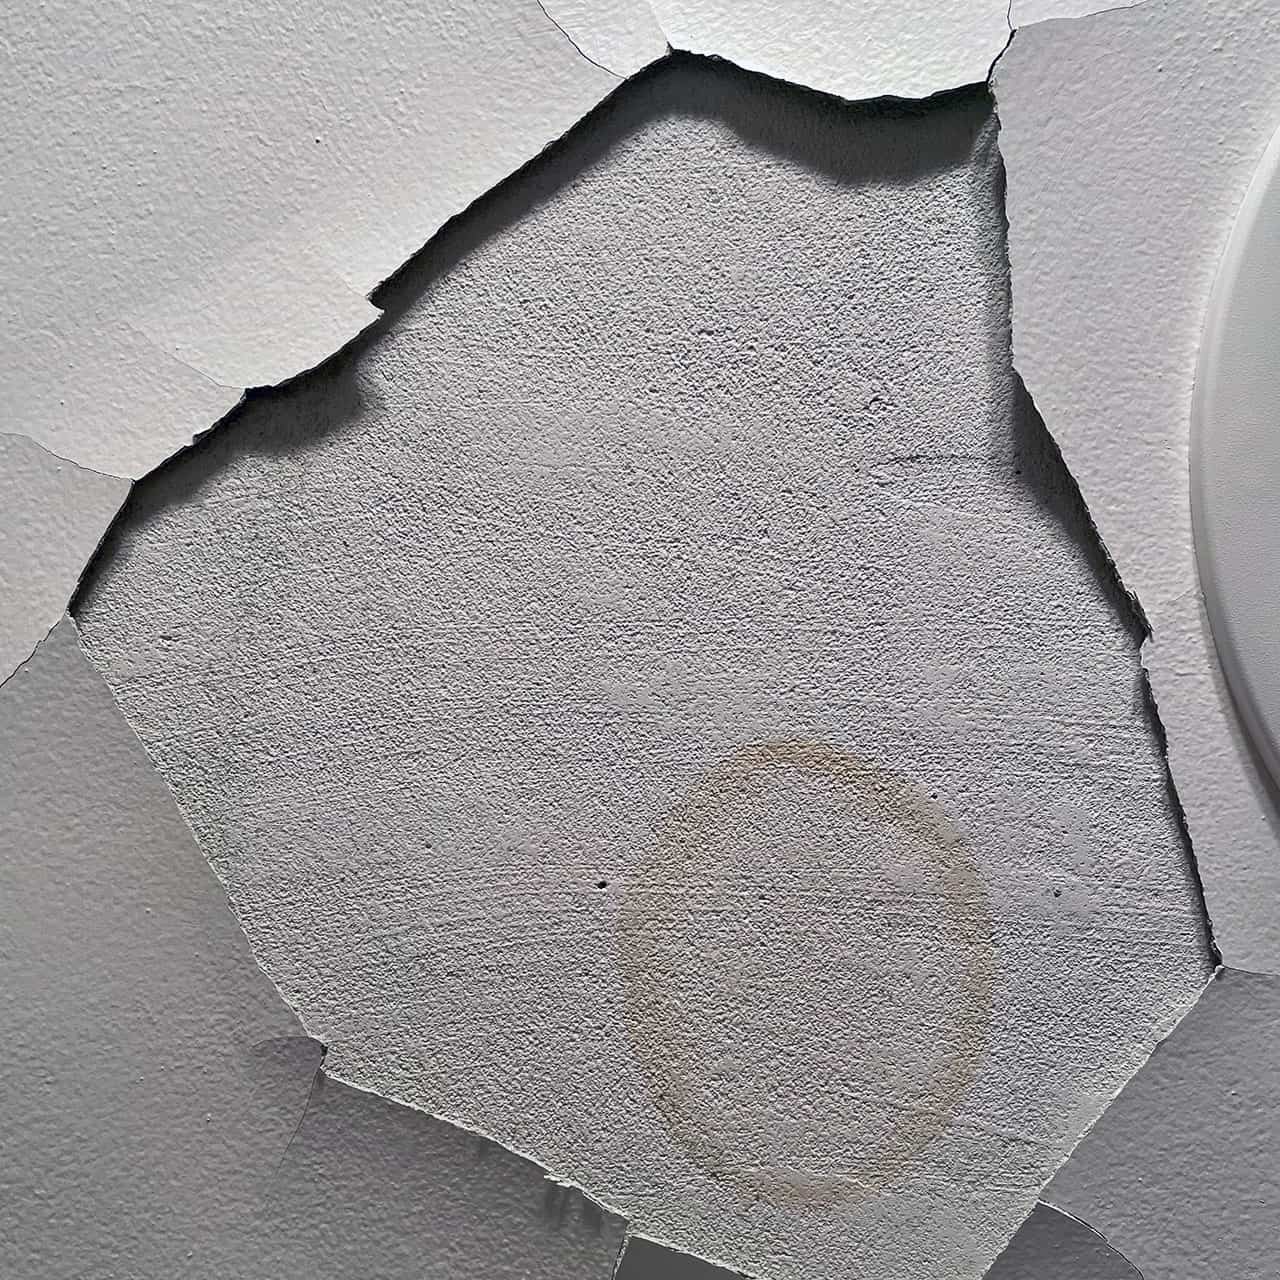 [Photo: A *bigger* stain in our bathroom ceiling]